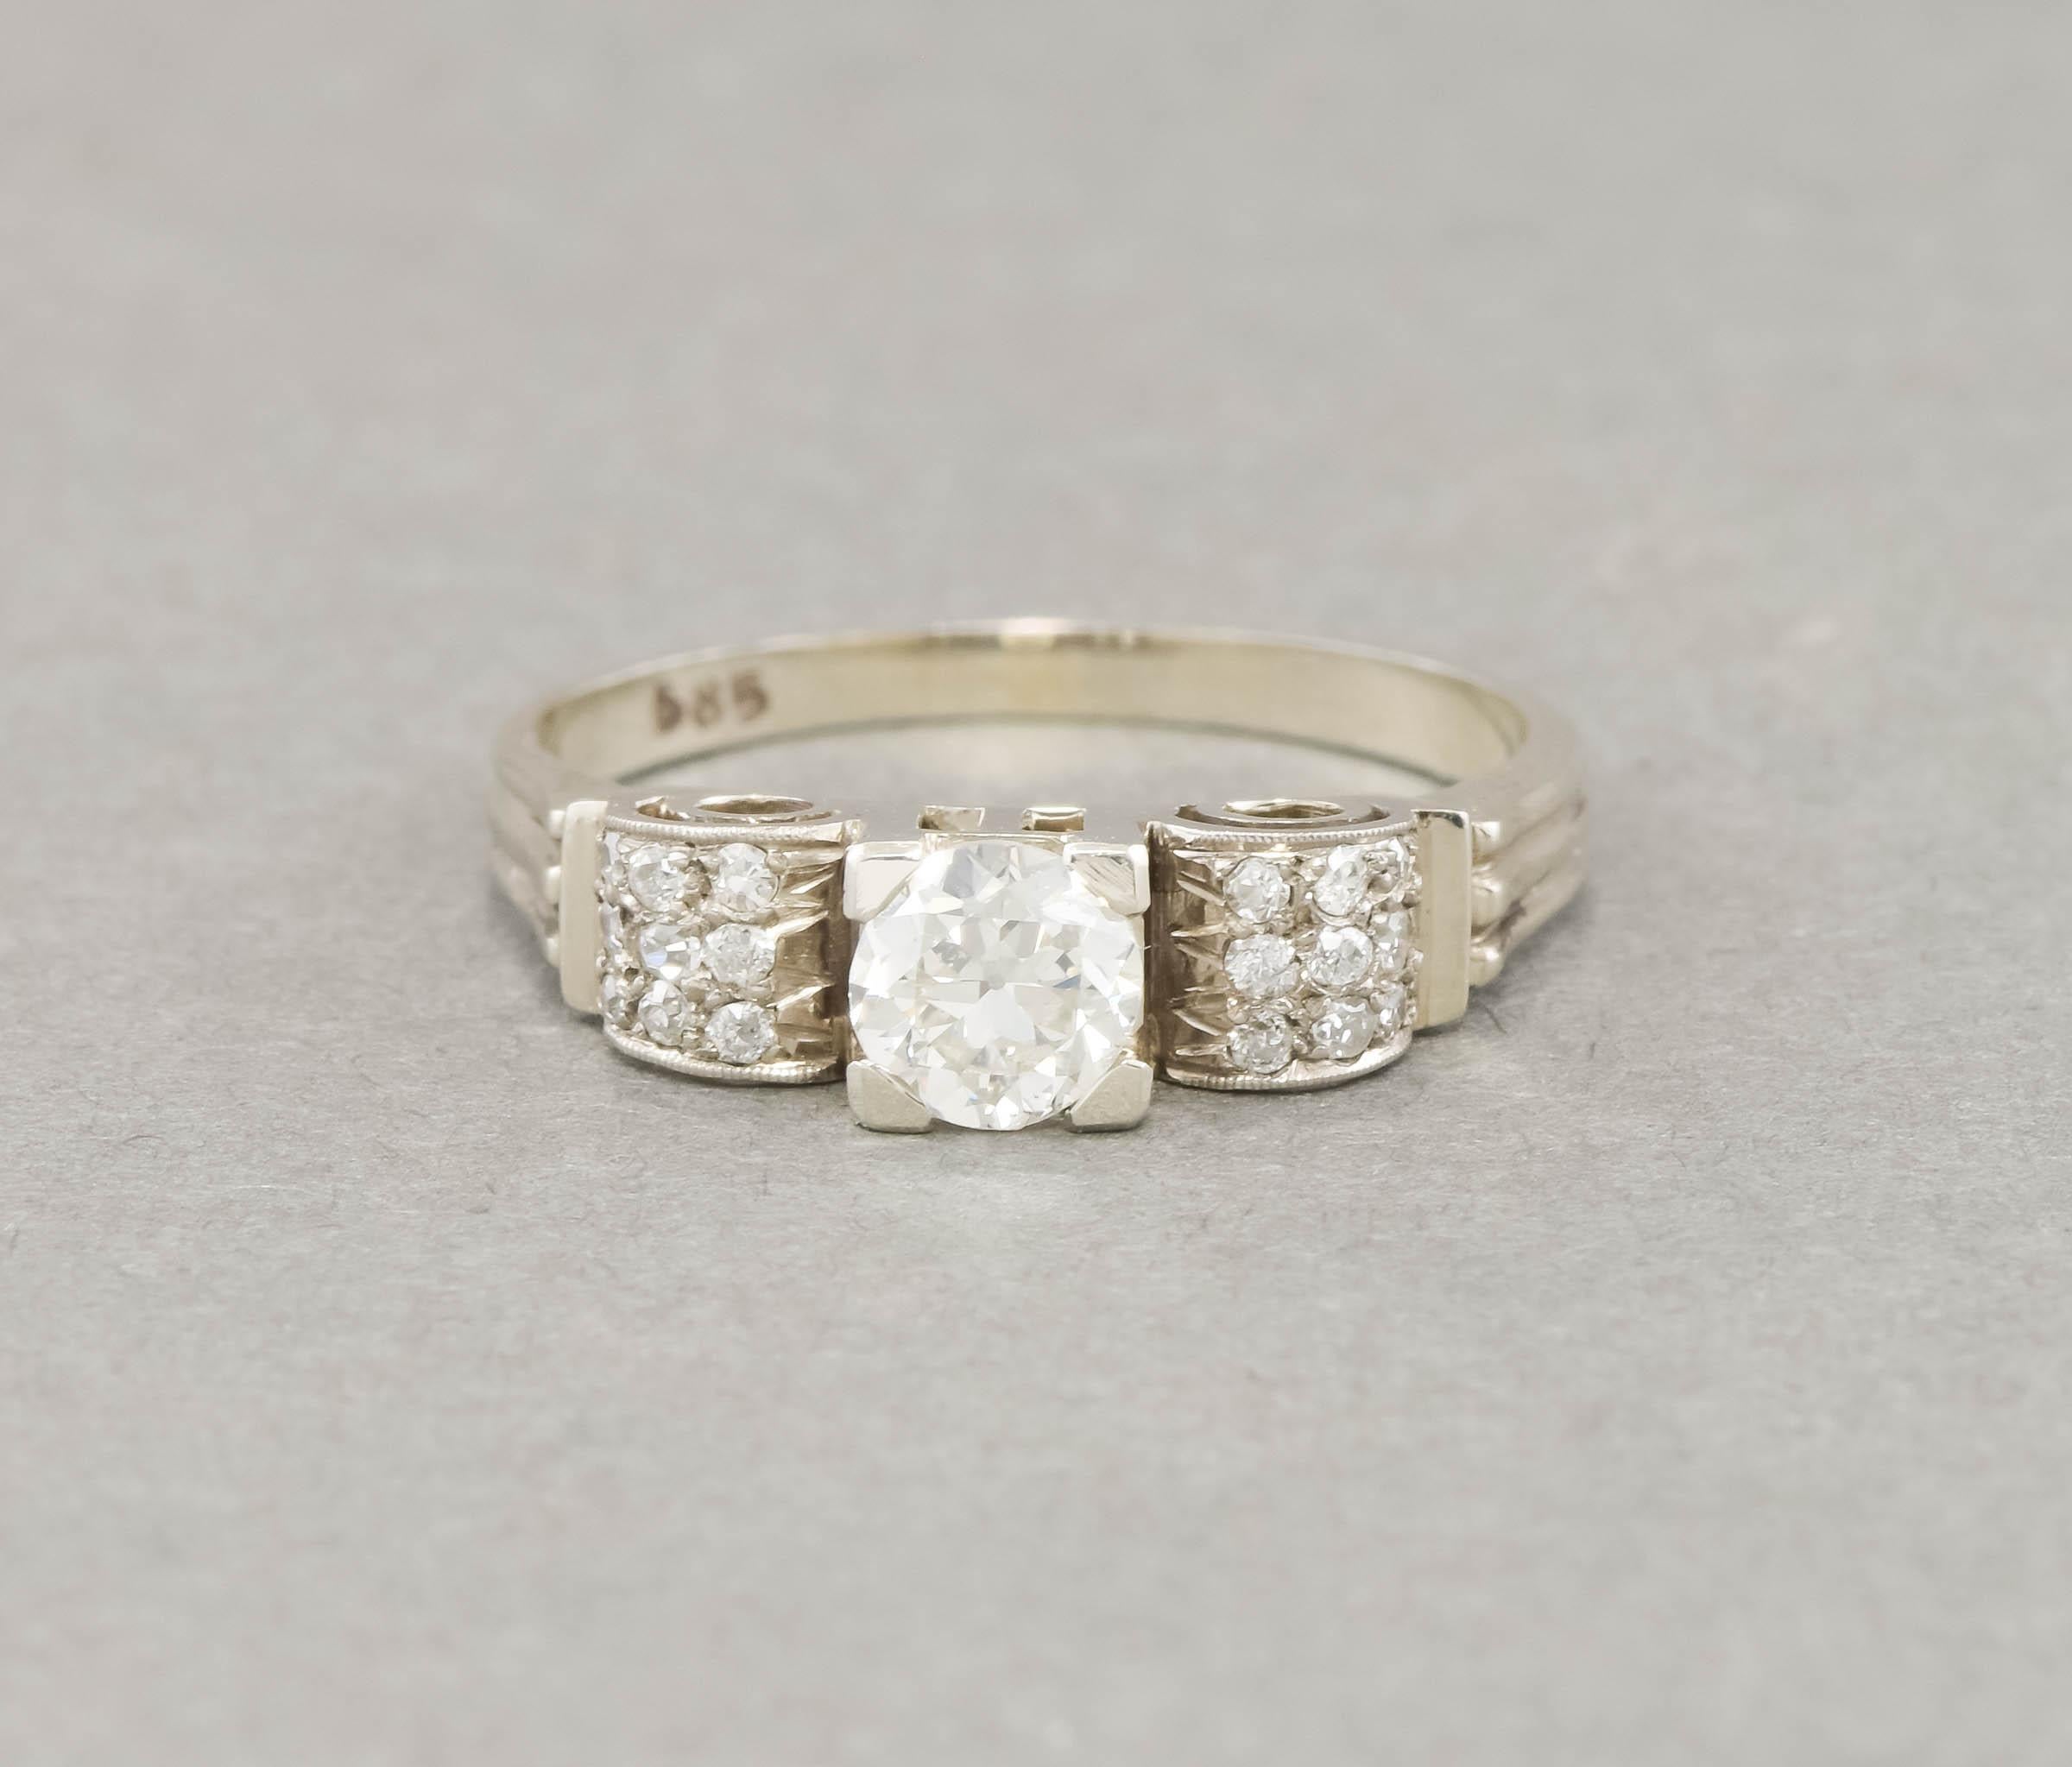 Made in Europe during the 1930's, this charming diamond engagement ring features an especially pretty European cut diamond amid a gracefully curving mounting of small accent diamonds.  (please note that dark areas in the diamonds are just